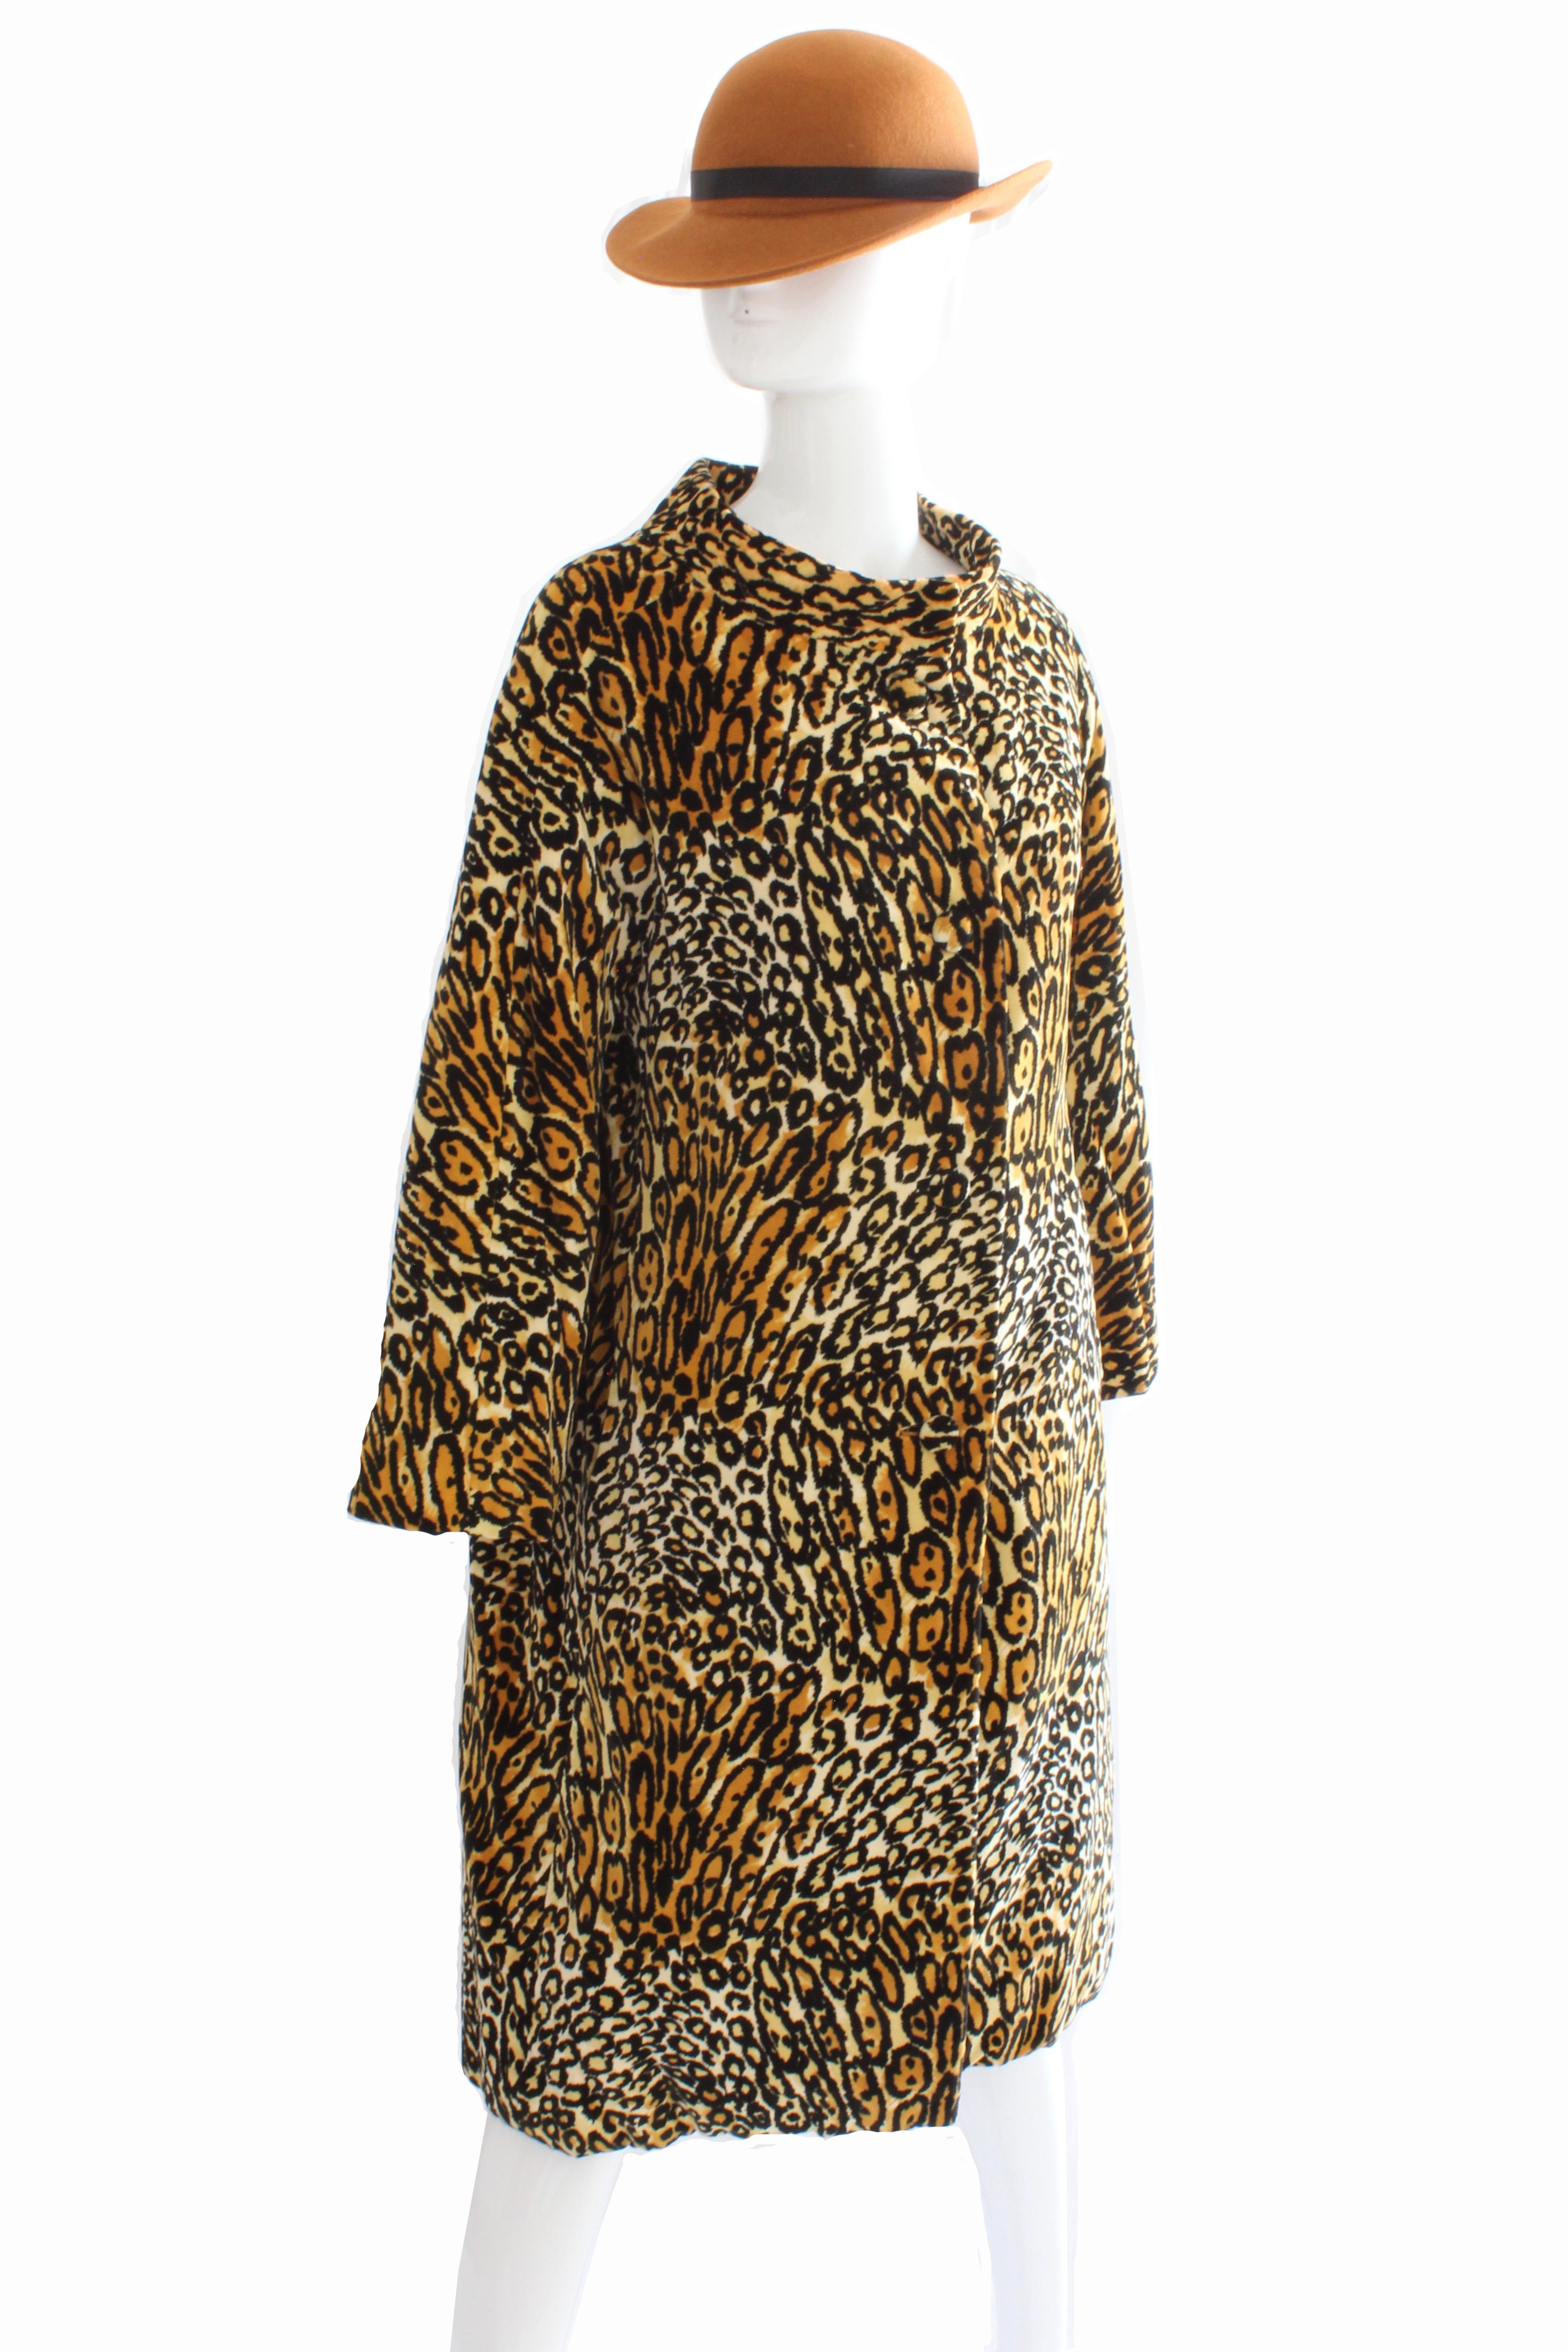 This fabulous coat was made by Bill Blass for Bond Street, most likely in the early 1970s. Made from velvet, it features a leopard print throughout and fastens from the collar to the hips. Lined in leopard print velvet at the bodice, with the